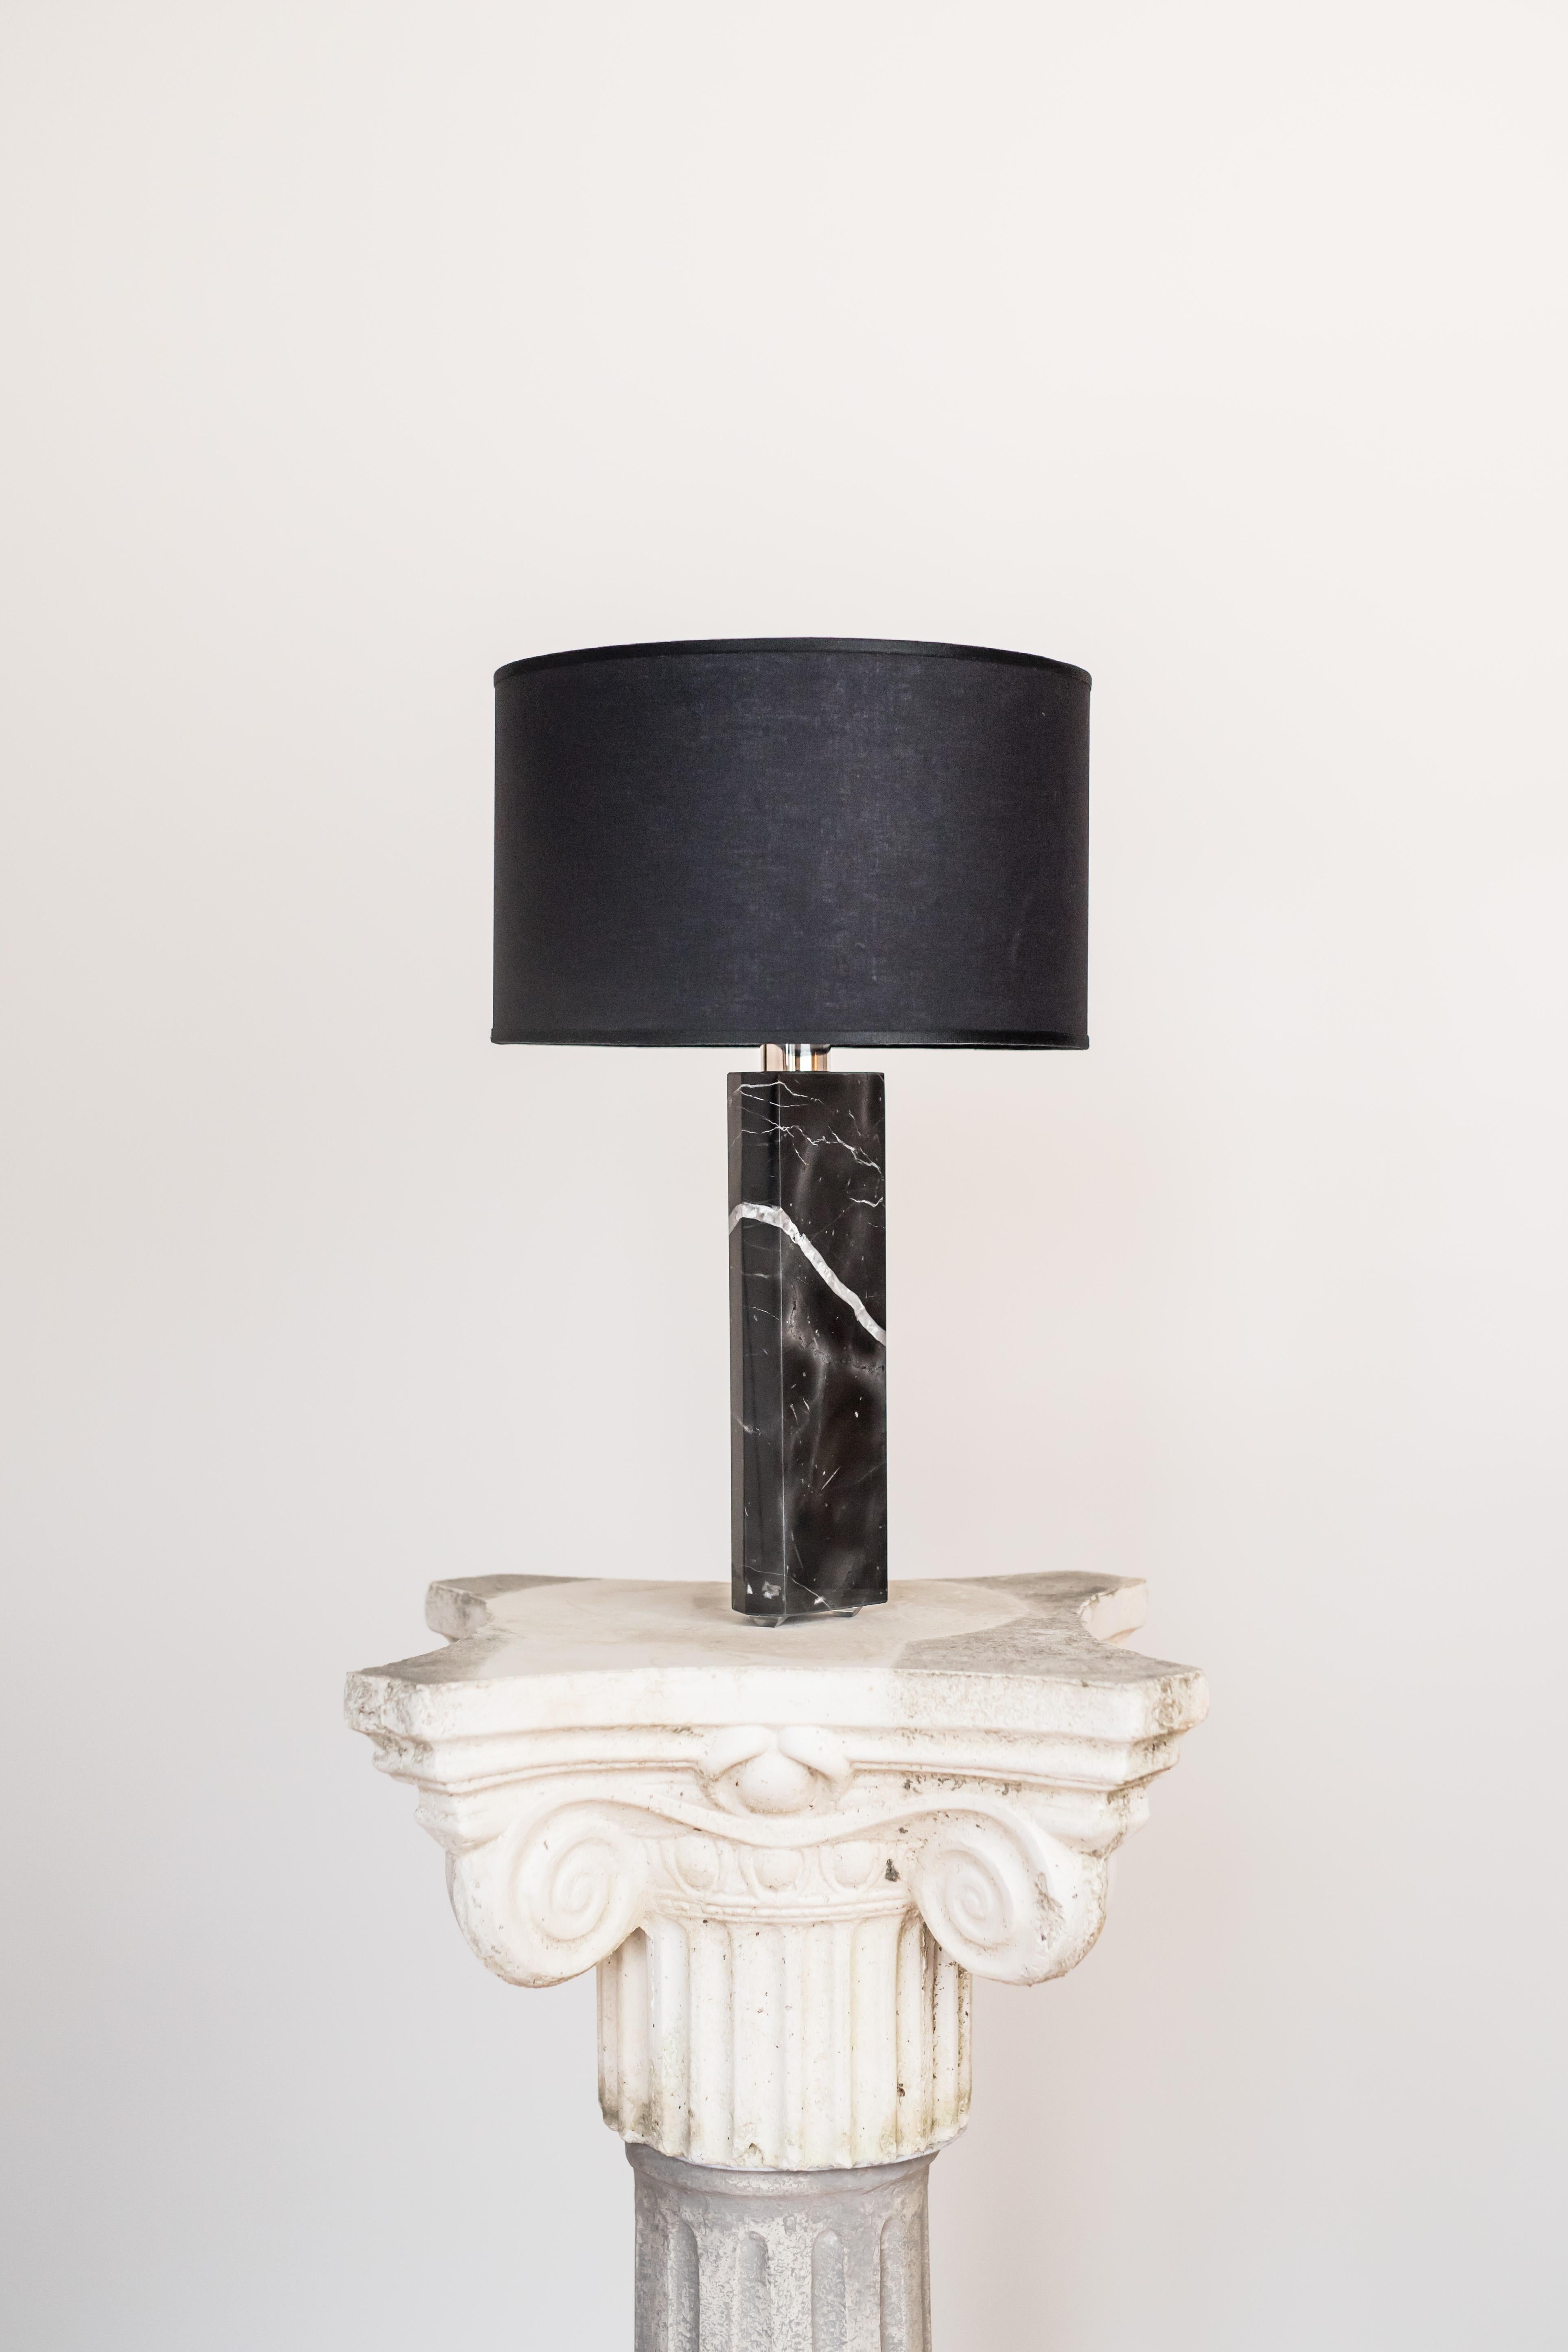 Black marble sculpted table lamp by brajak vitberg
Black marble
Dimensions: 52 x 35 x 35 cm
White or black cotton lampshade, cotton wiring

Bijelic and Brajak are two architects from Ljubljana, Slovenia.
They are striving to design craft